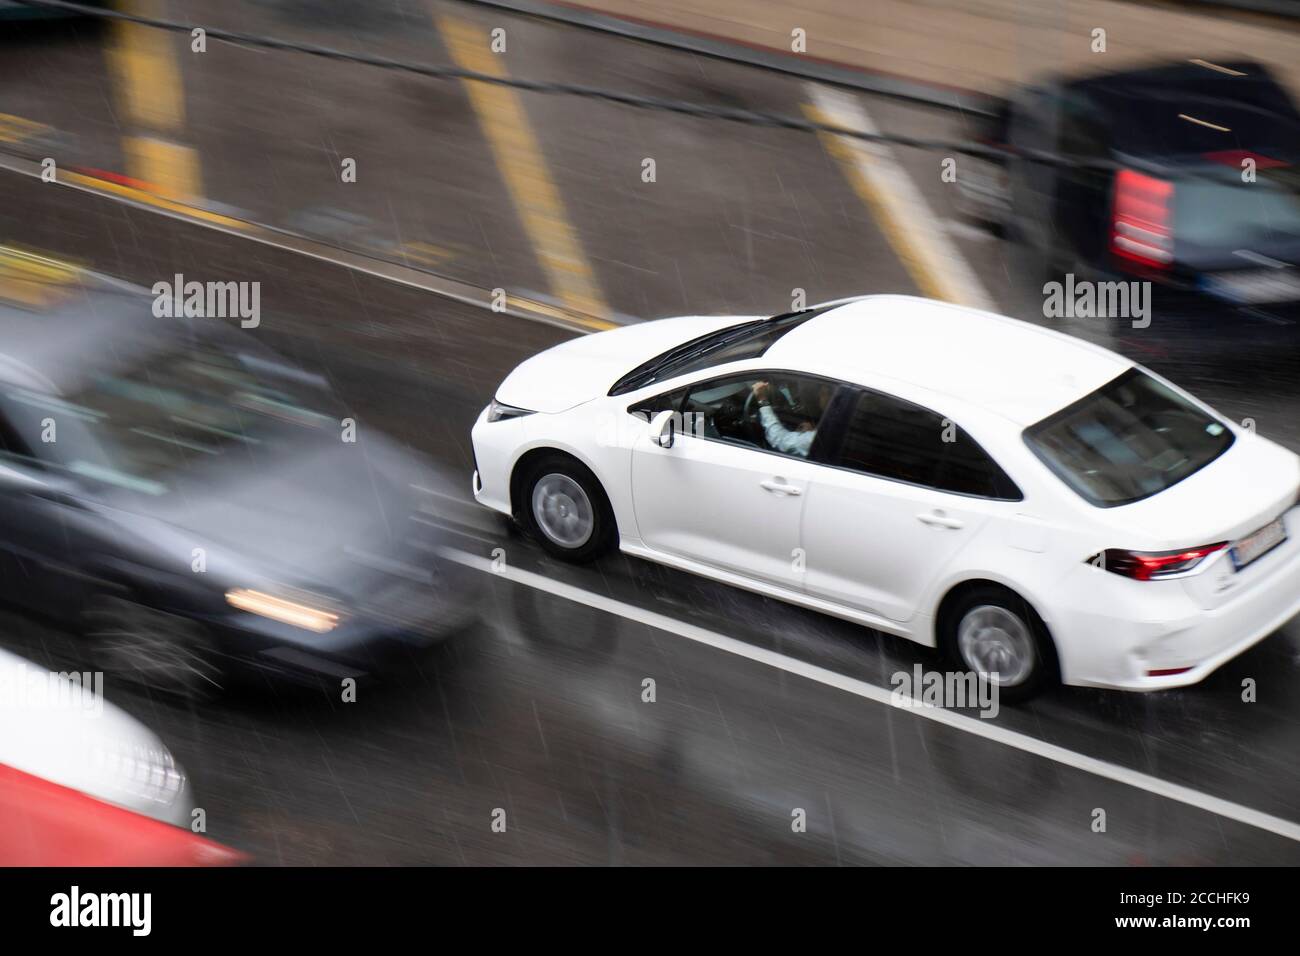 Blurry driving cars on the street hit by the heavy rain with hail, on a rainy day in motion blur panning shot from above Stock Photo